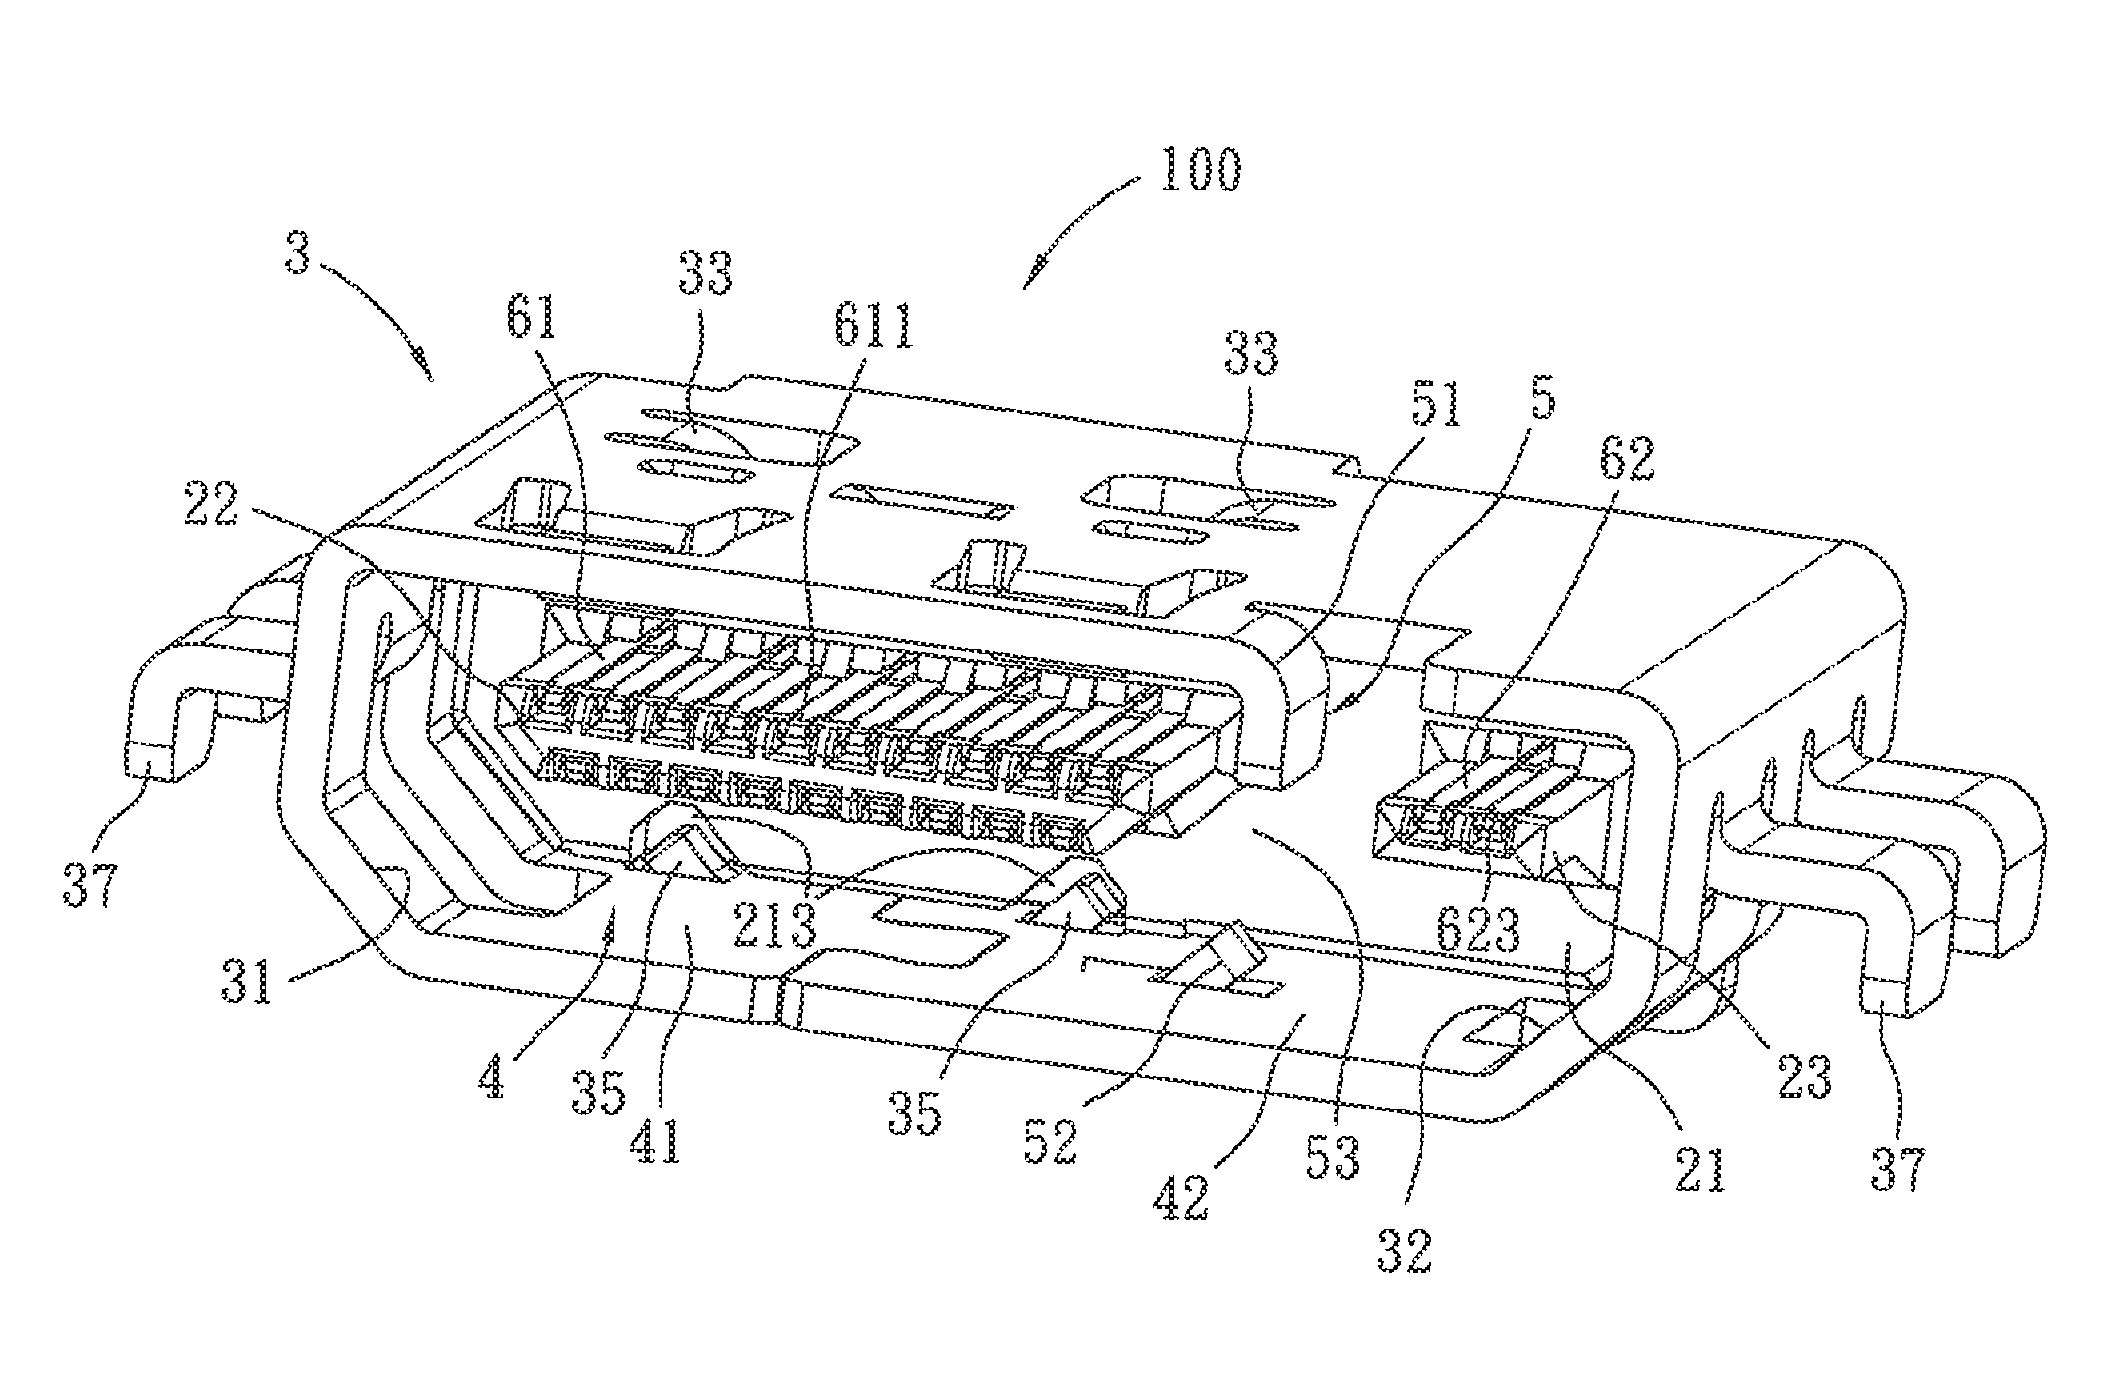 Connector with side power bay